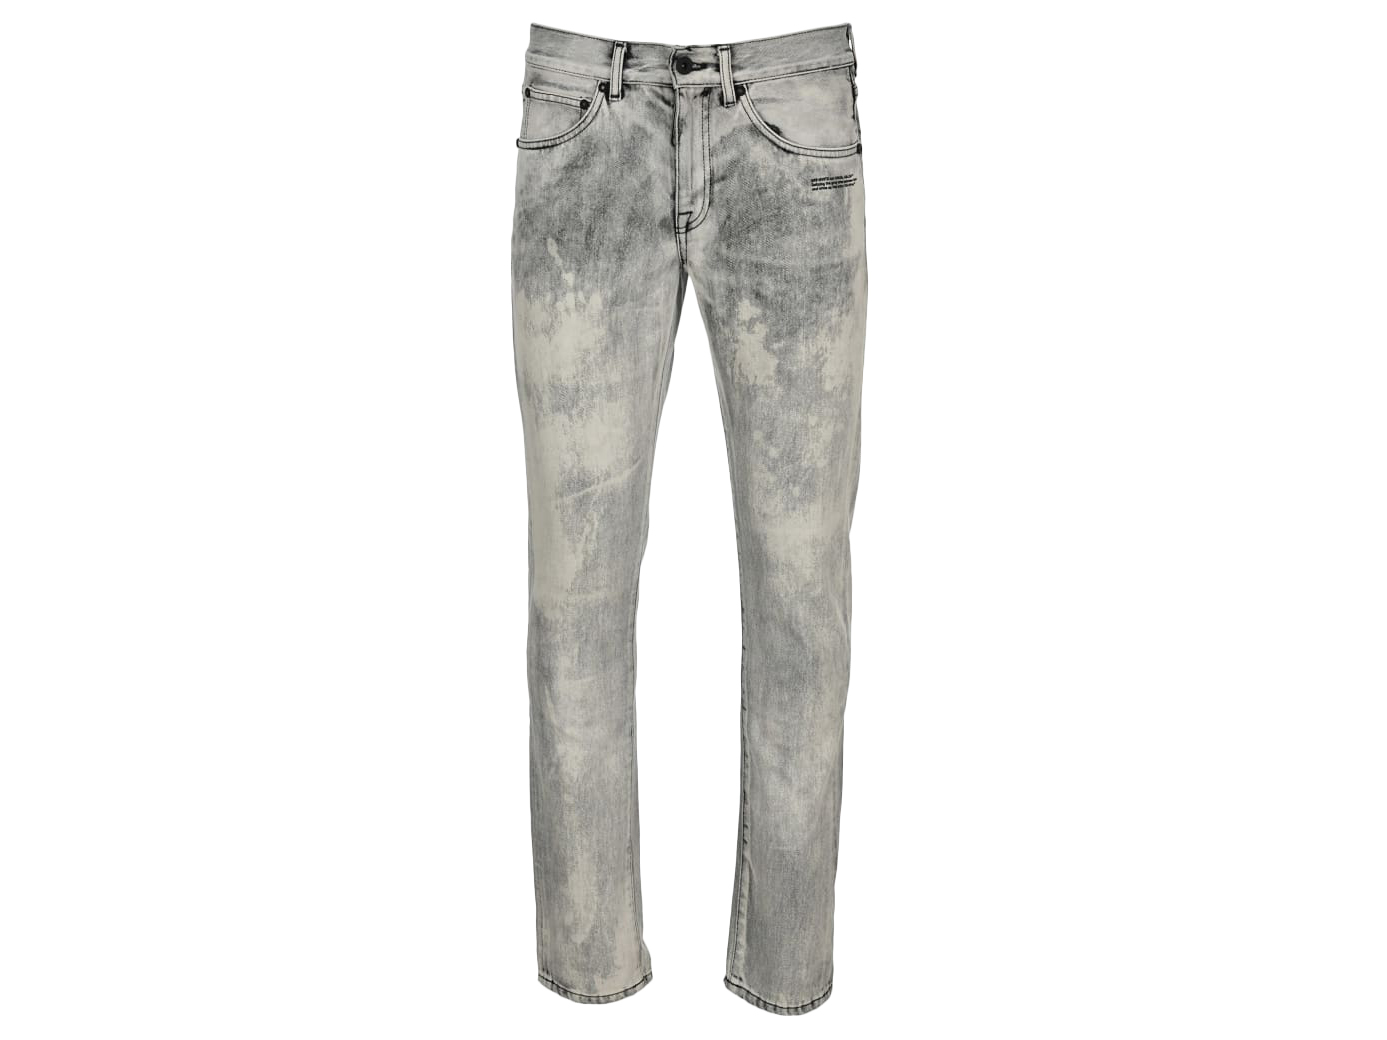 Buy Denim Blue Stone Washed Jeans Online in India -Beyoung